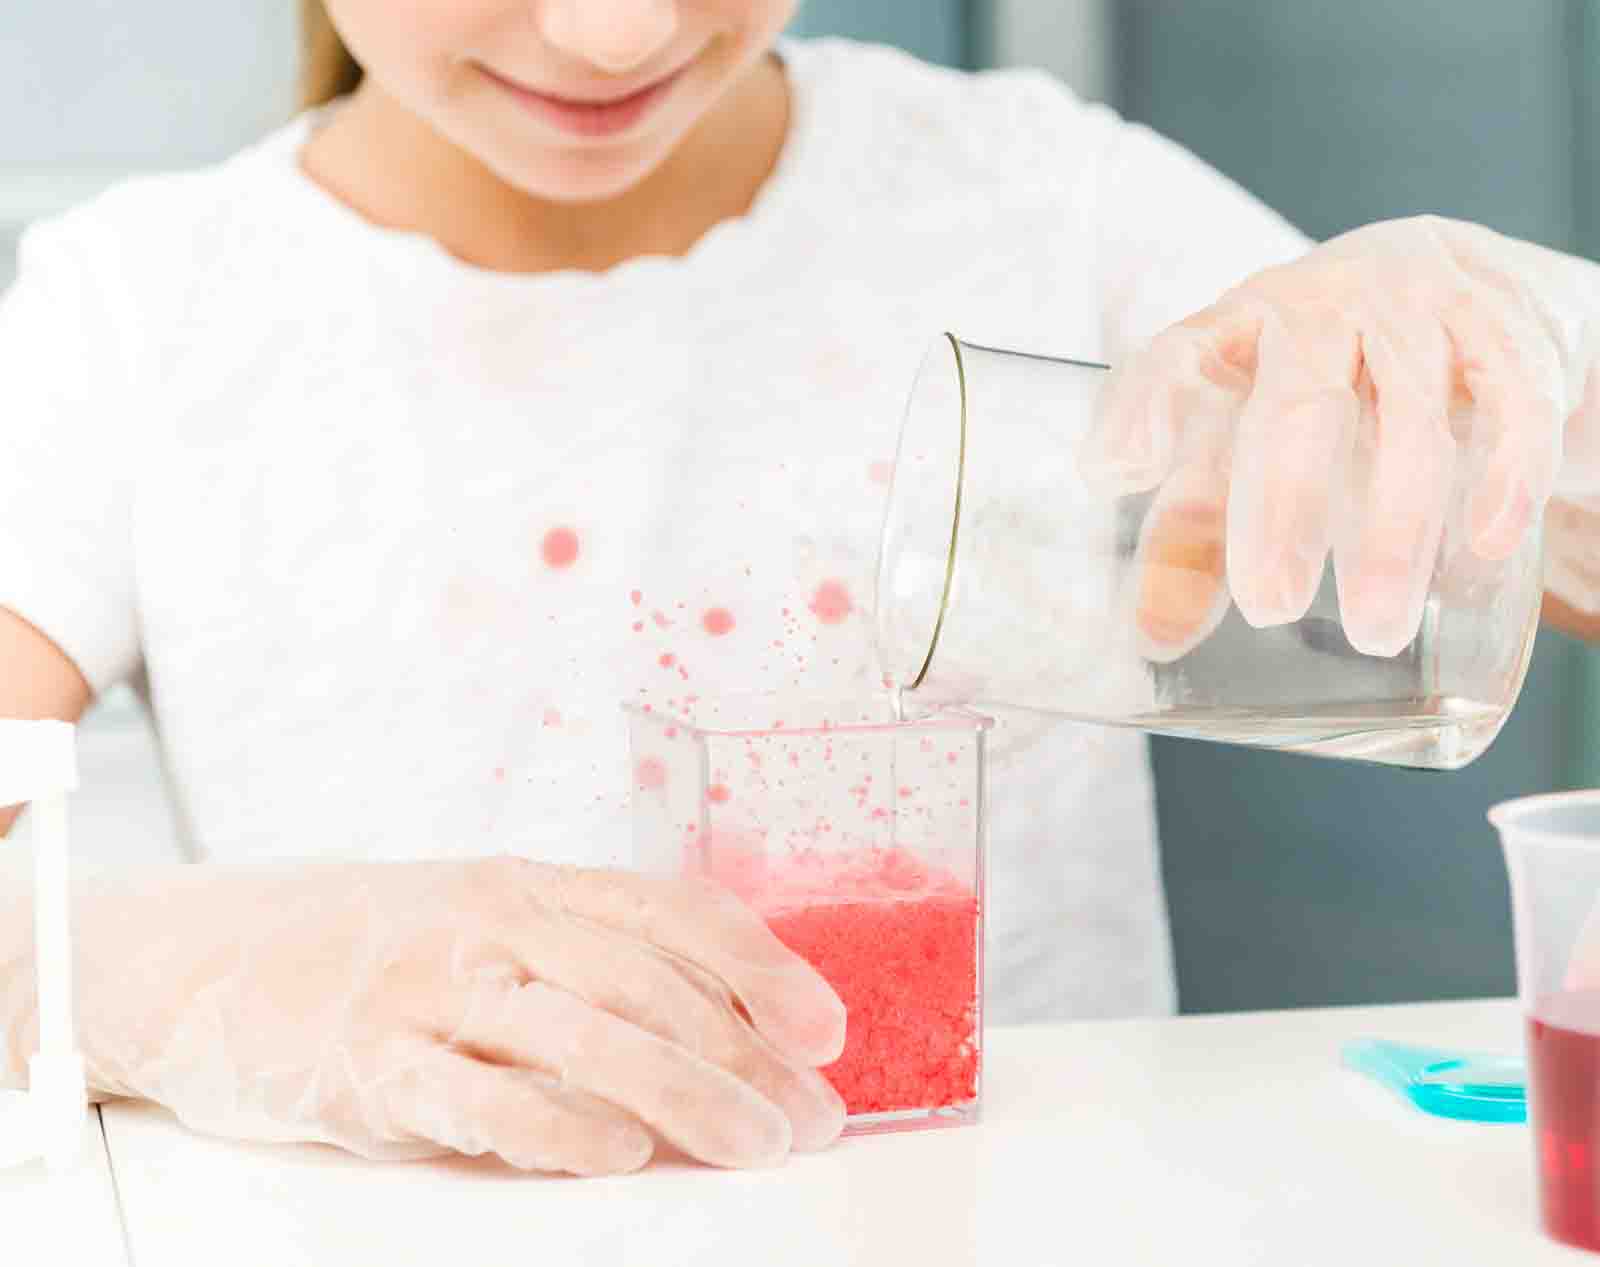 Easy Science Experiments for Kids- Teach Volume with One Simple Household Item